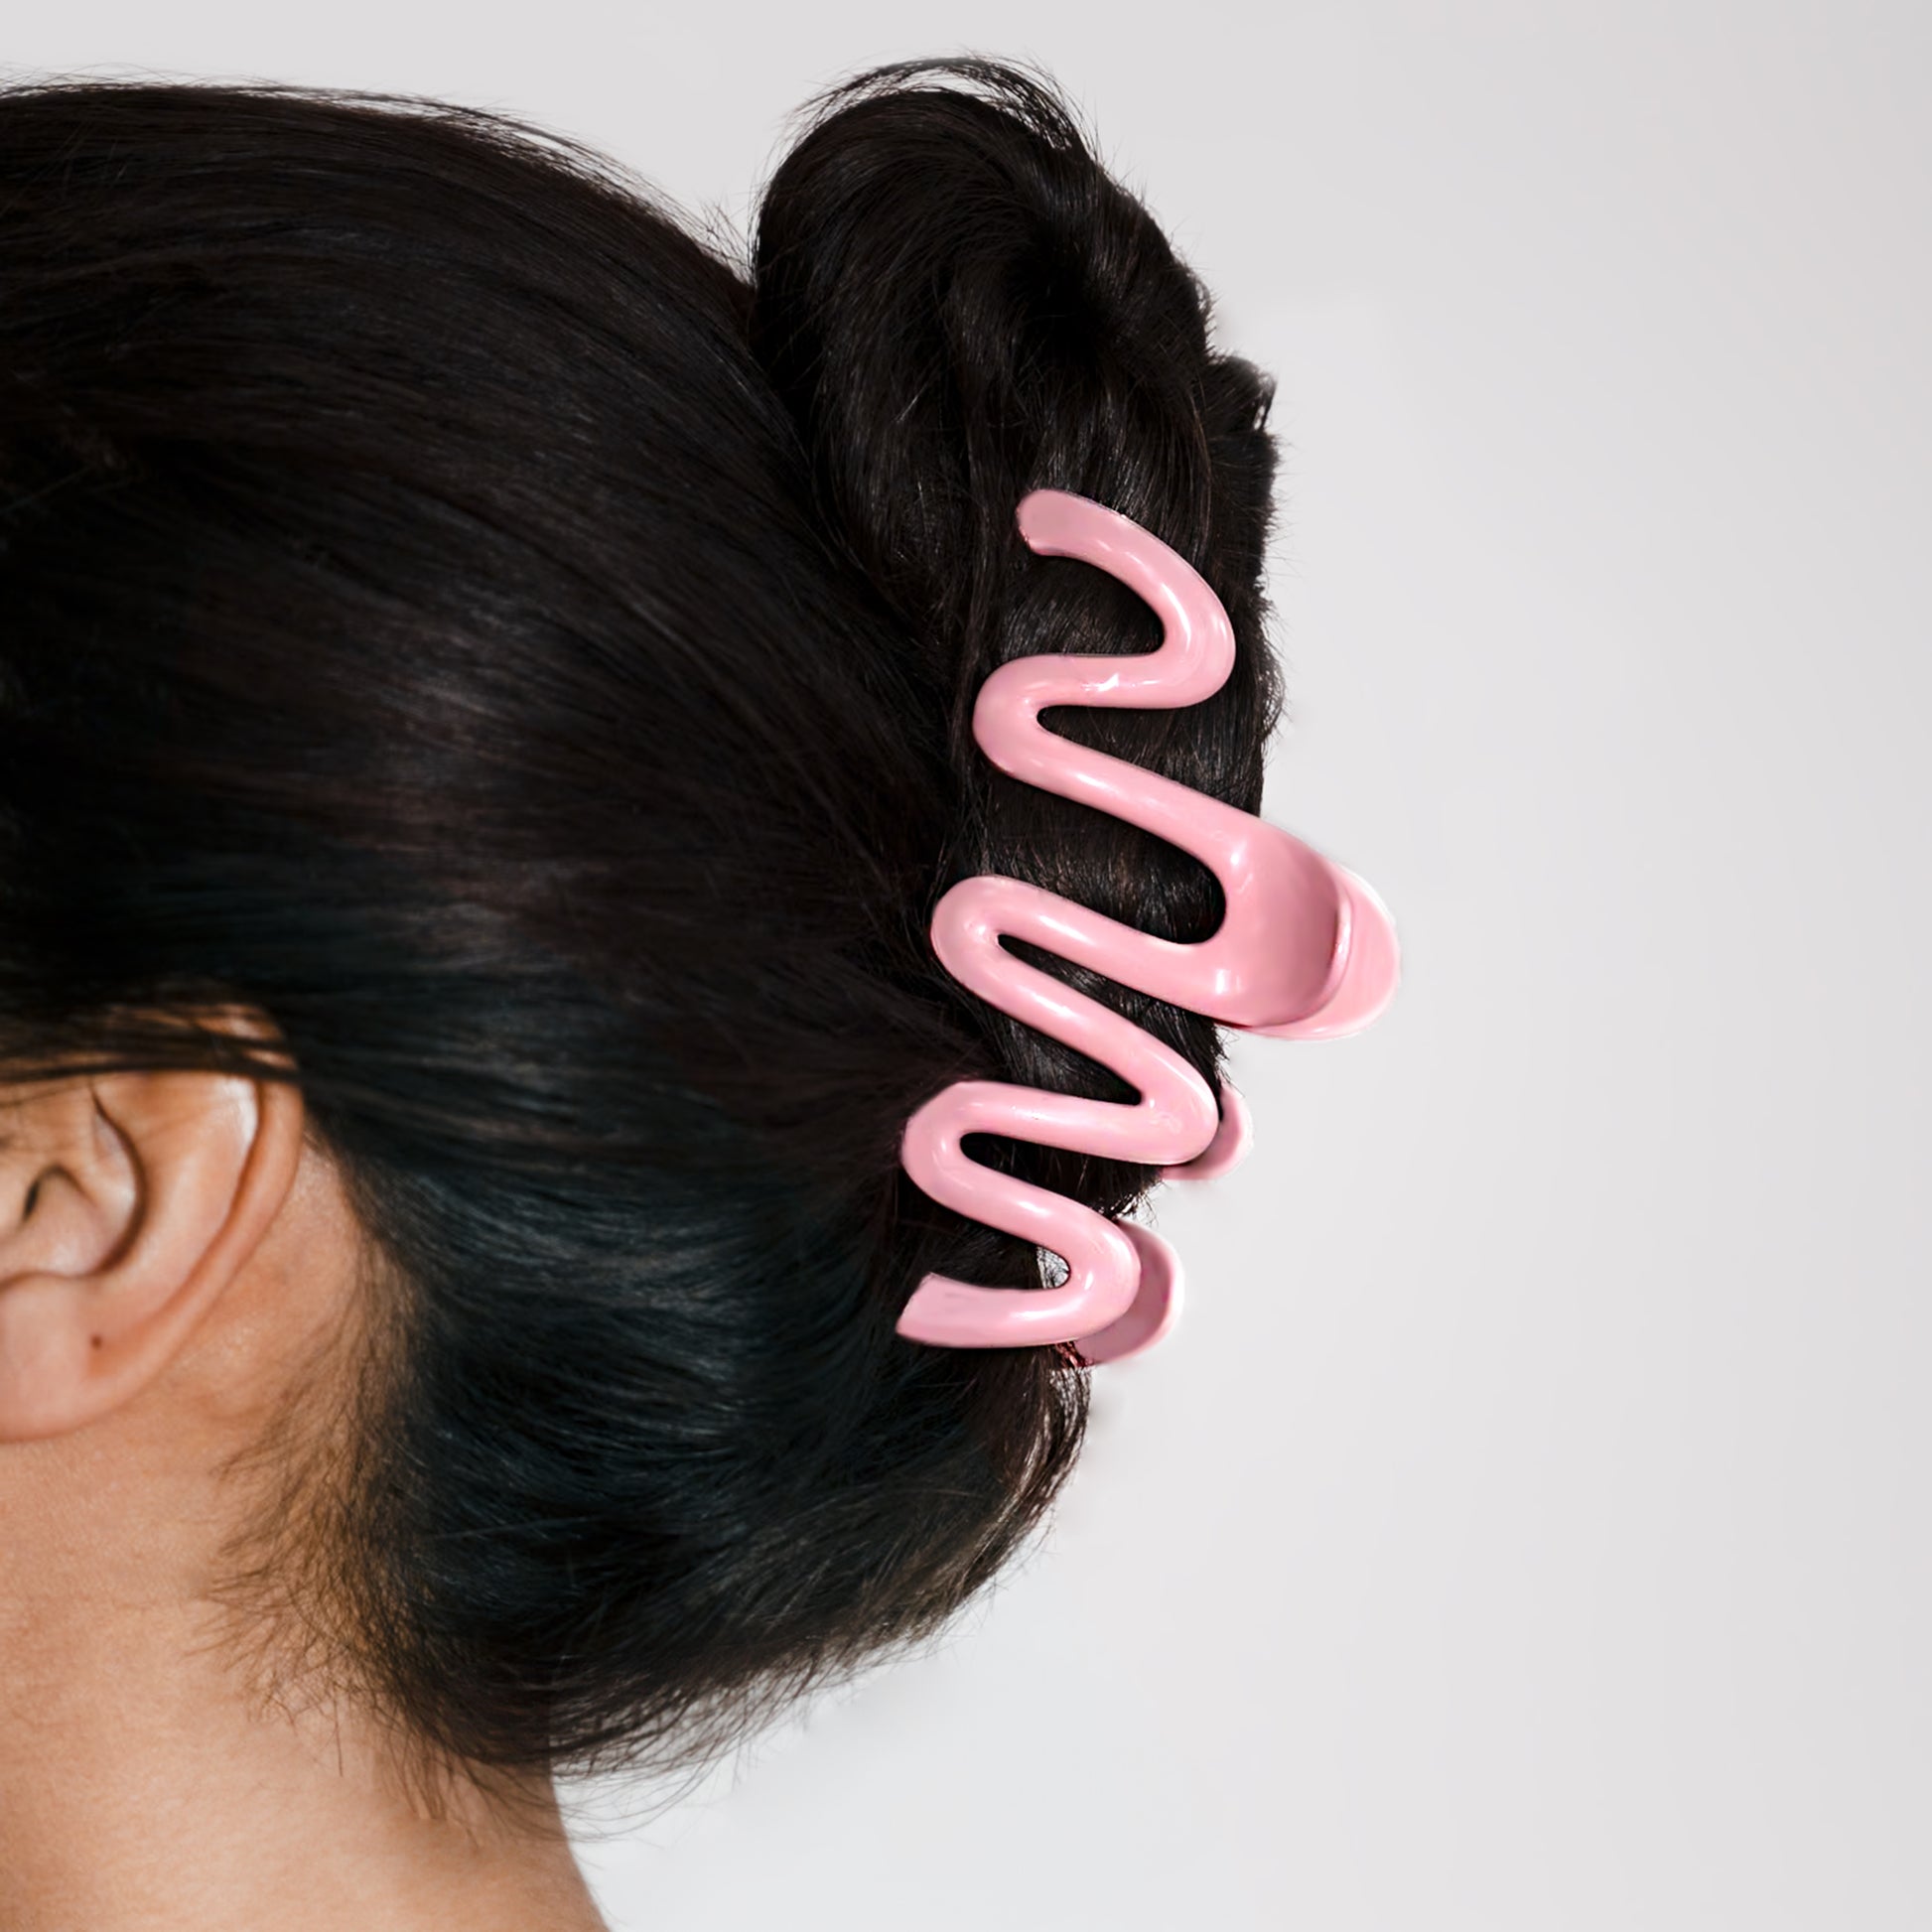 Pink Zigzag Wavy Claw Hair Clip shown worn the model's hair